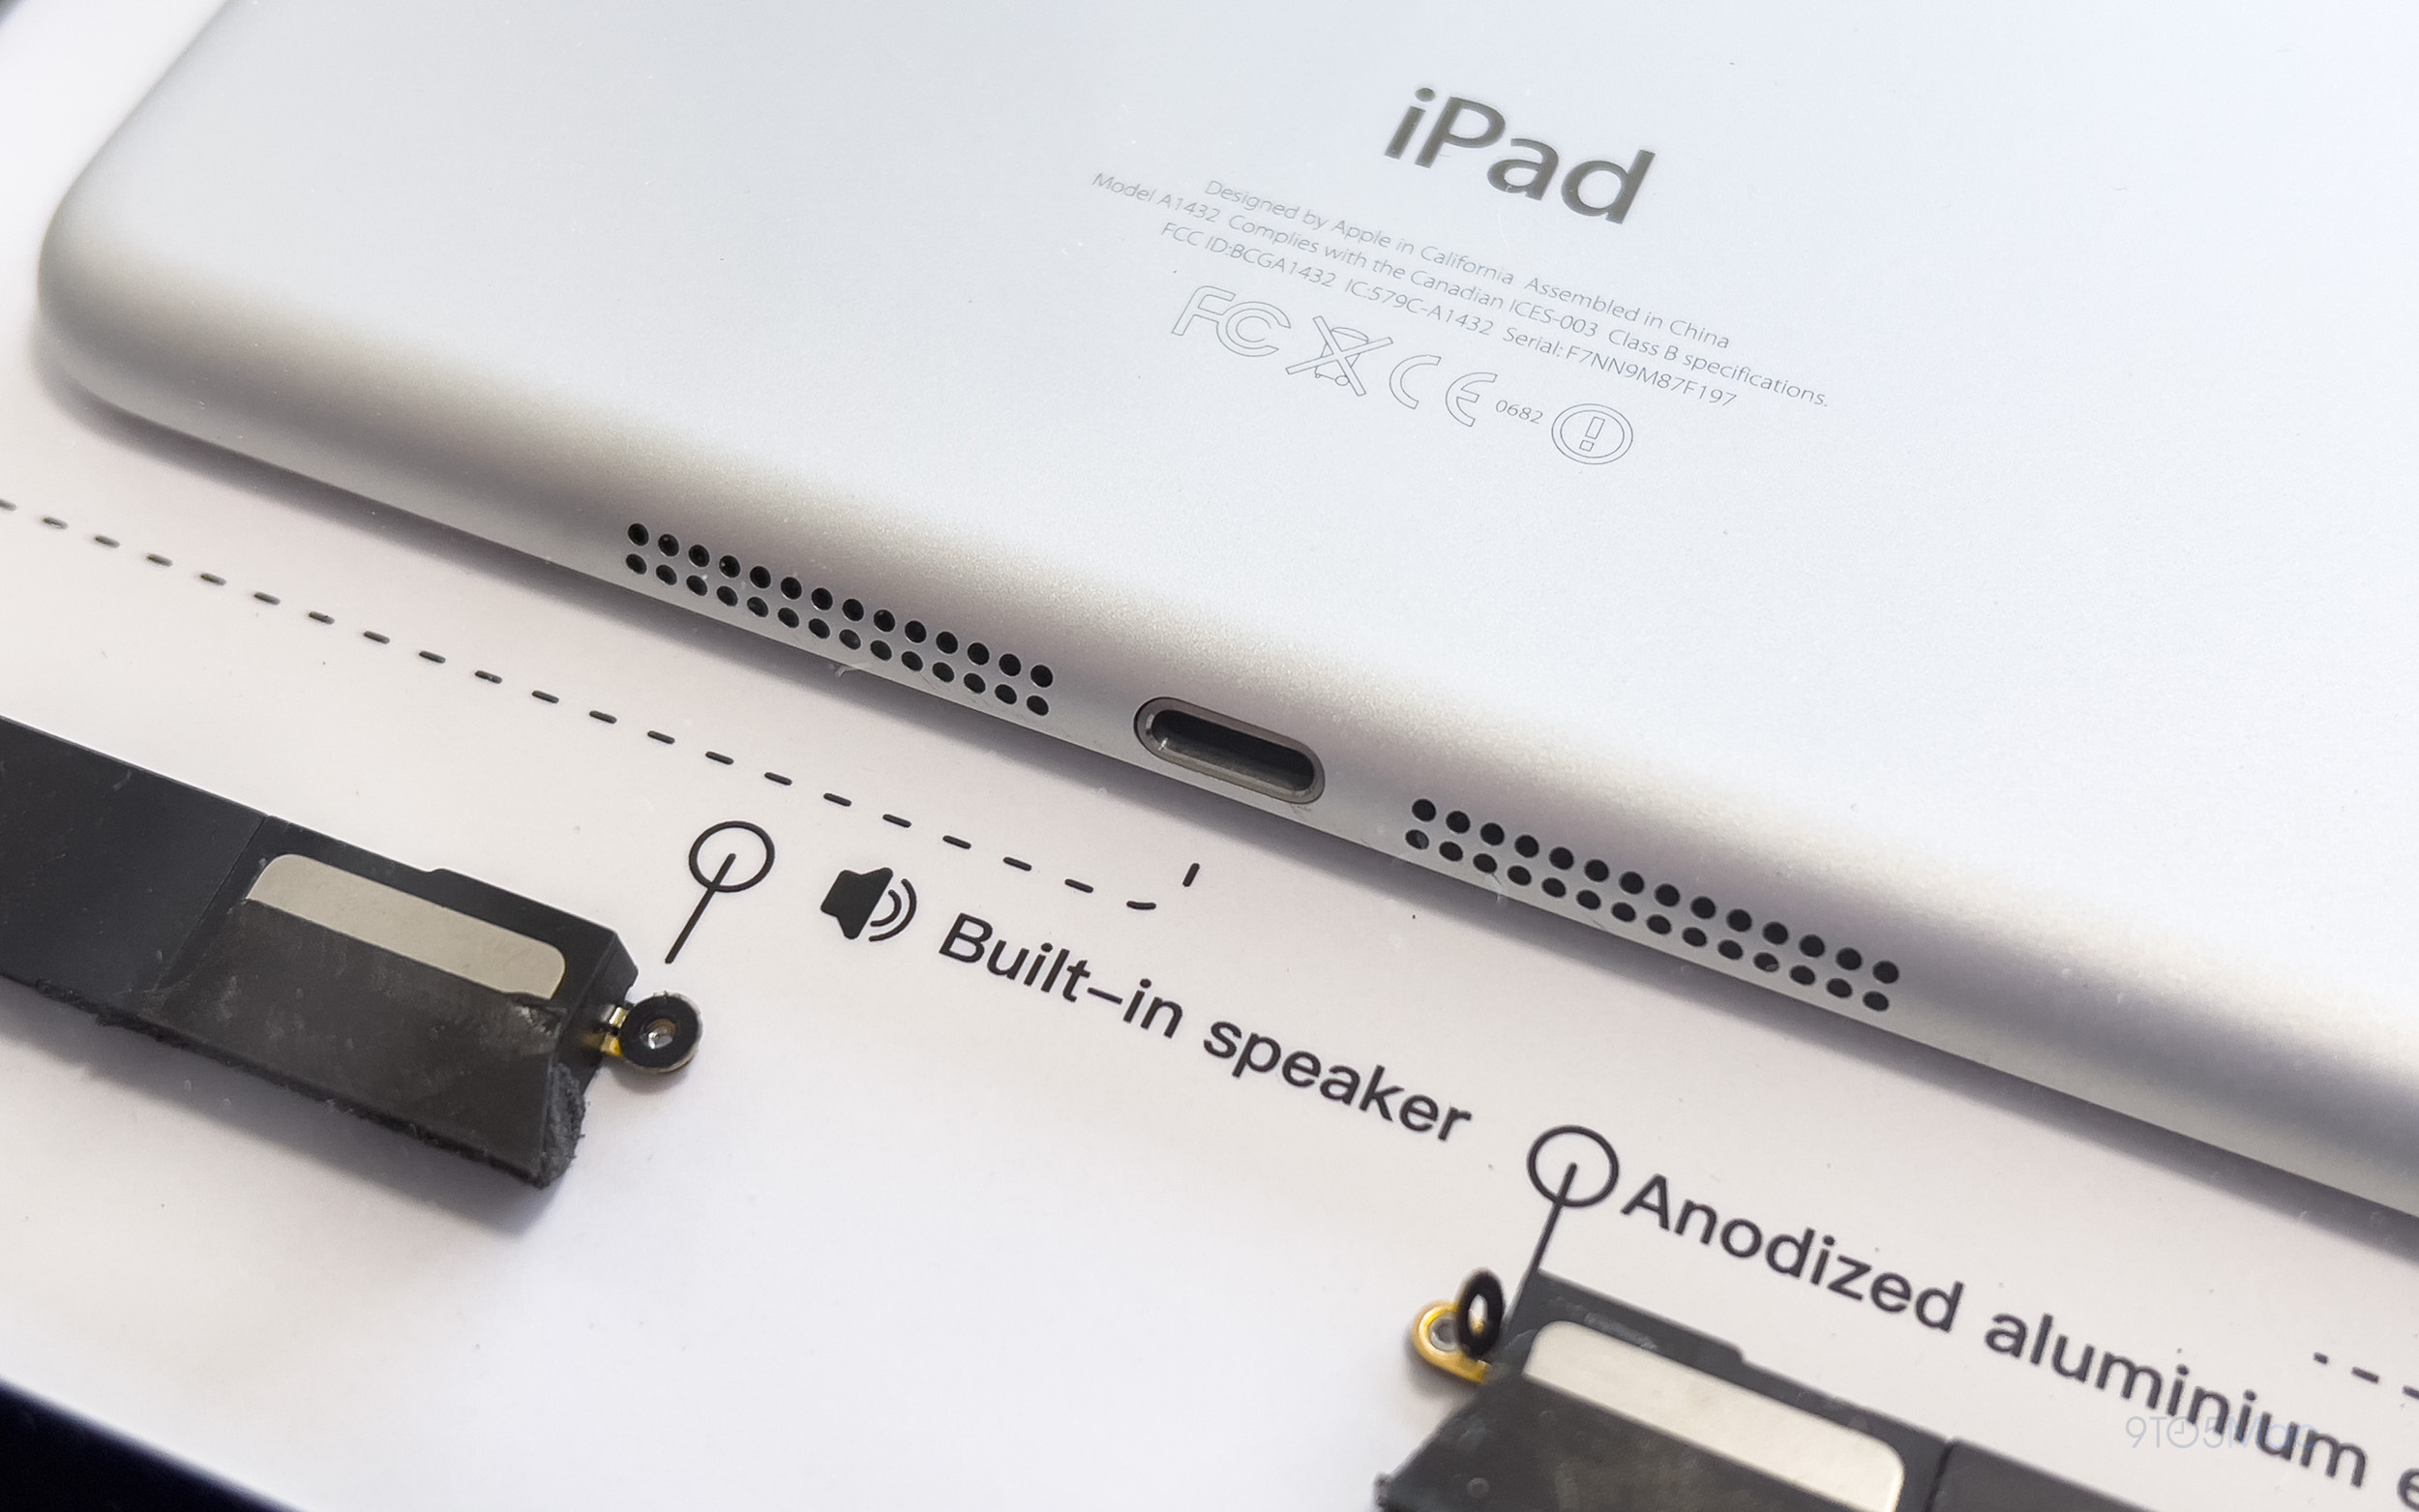 Here's a look at a first generation iPad mini taken apart and crafted by GRID